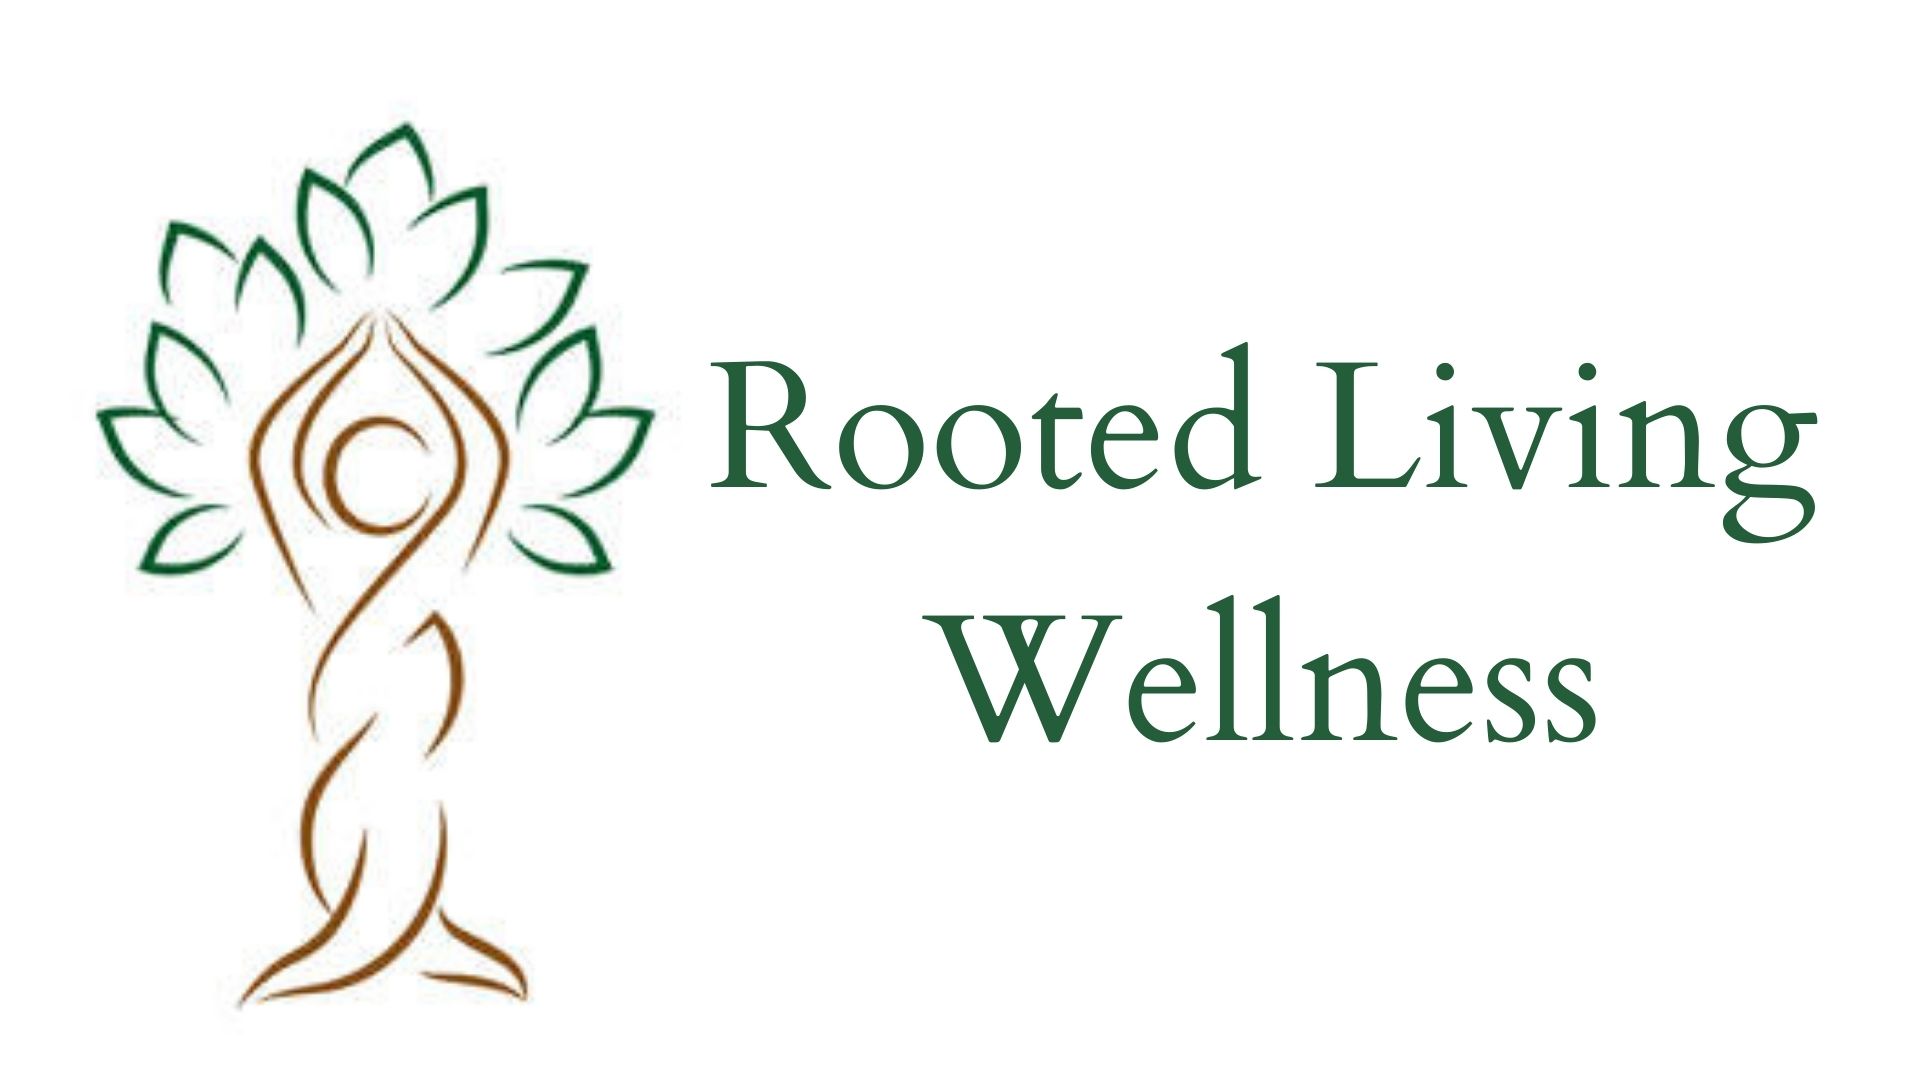 ROOTED LIVING WELLNESS Logo